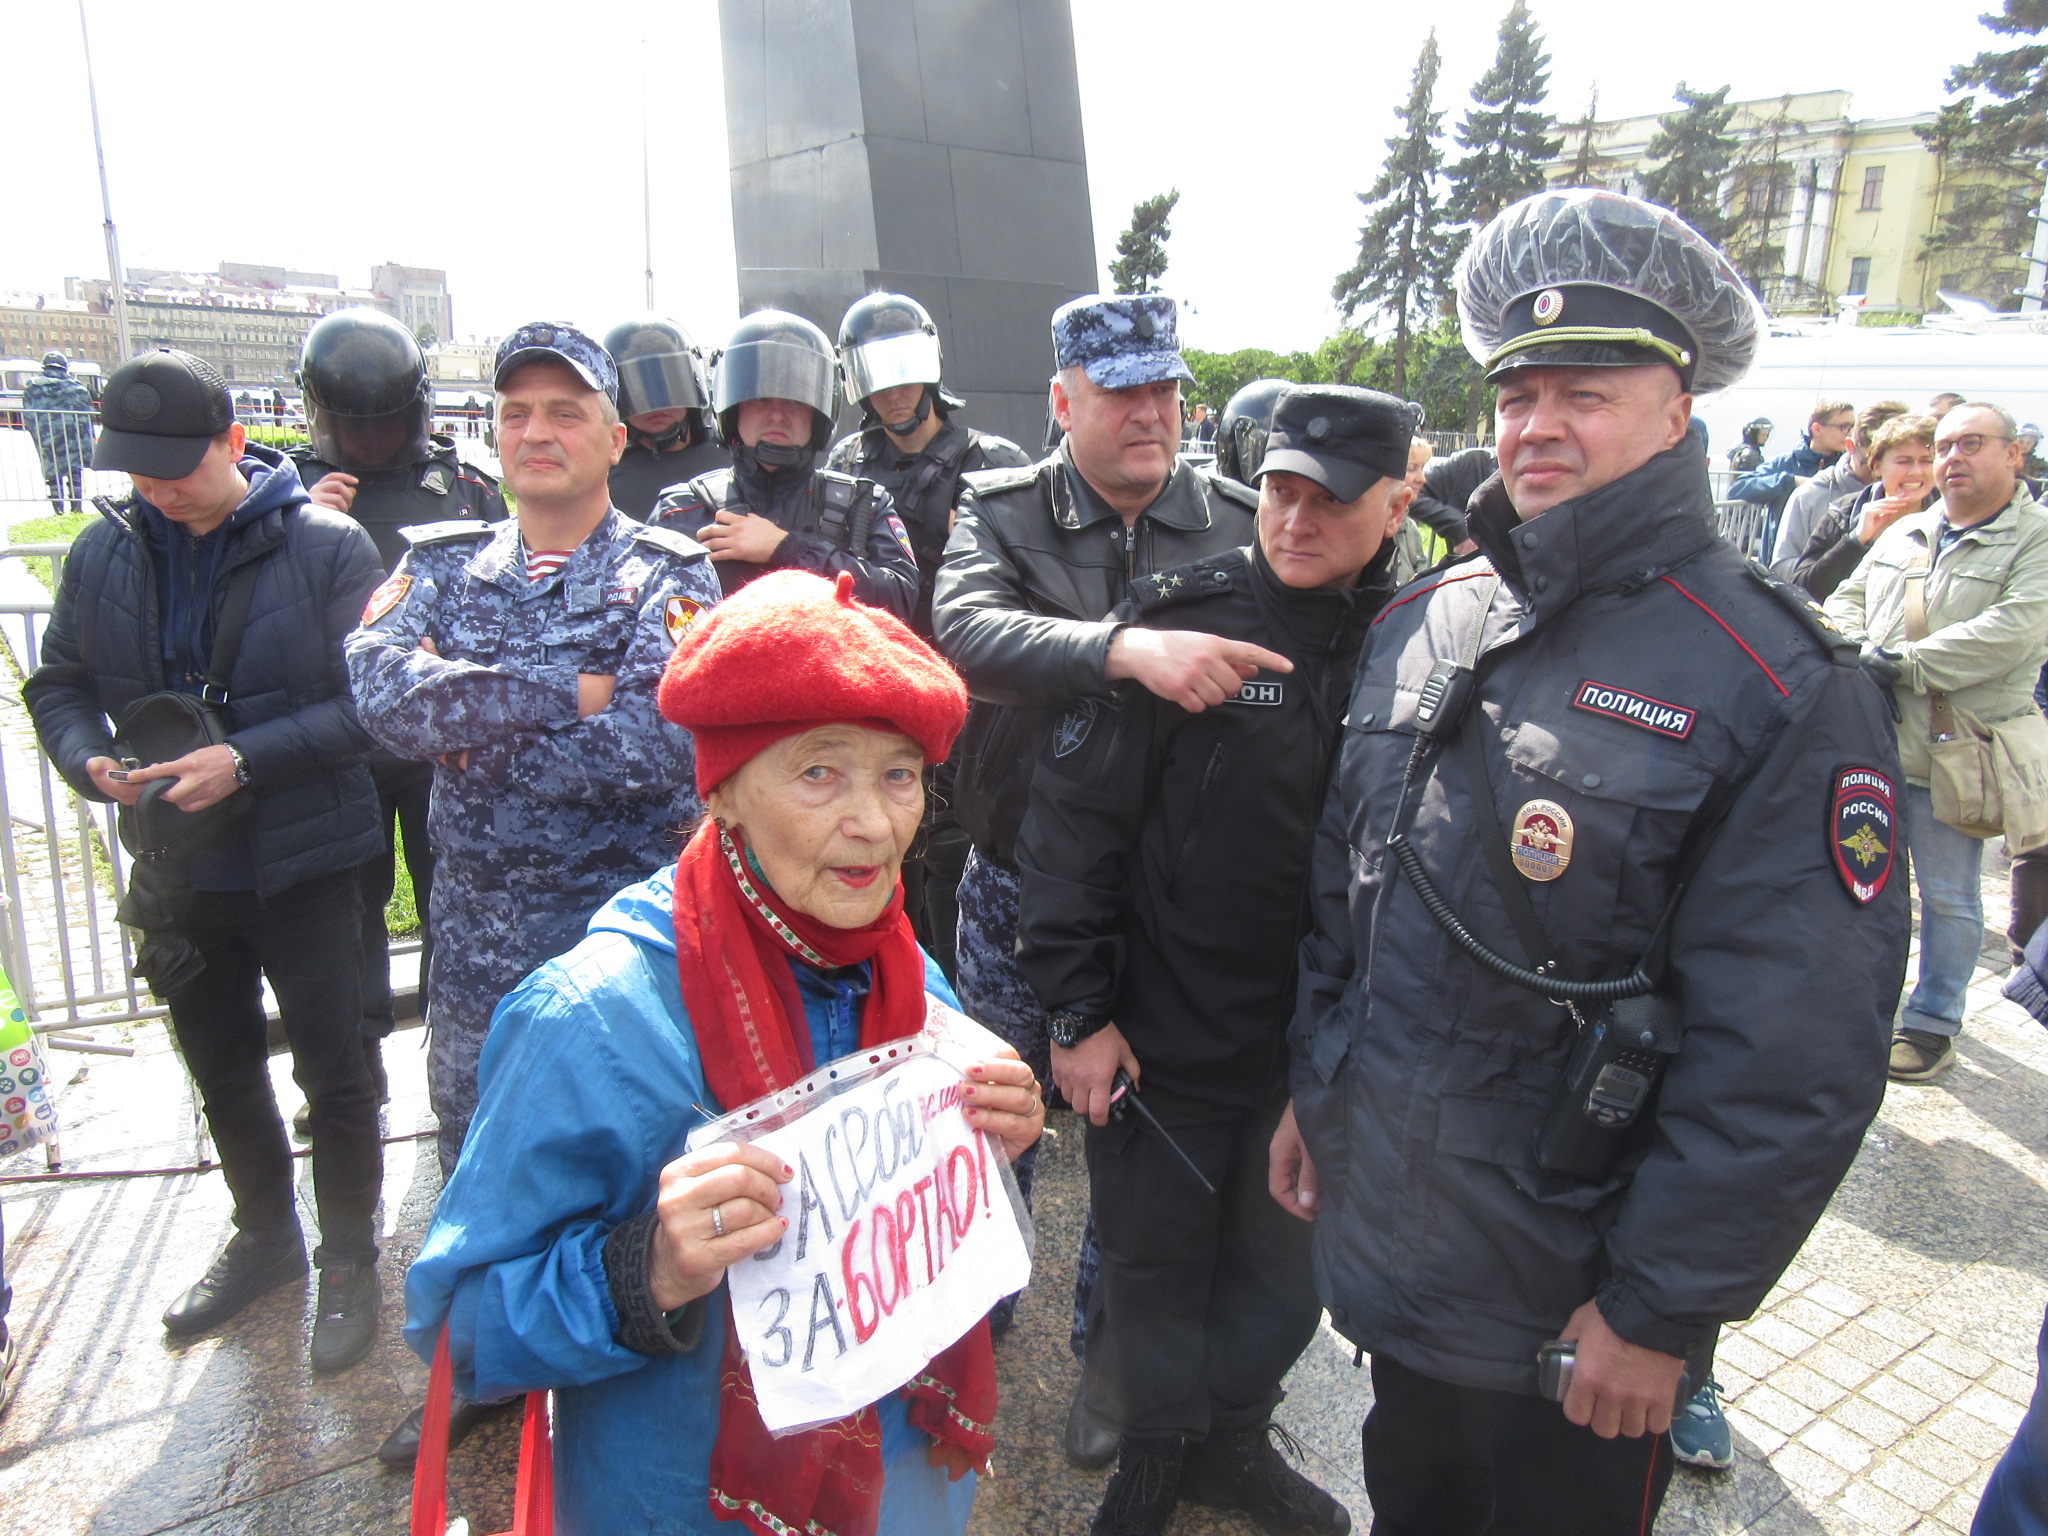 St_Petersburg.2019-08-02.Solidarity_with_Moscow_protests_rally.IMG_3931